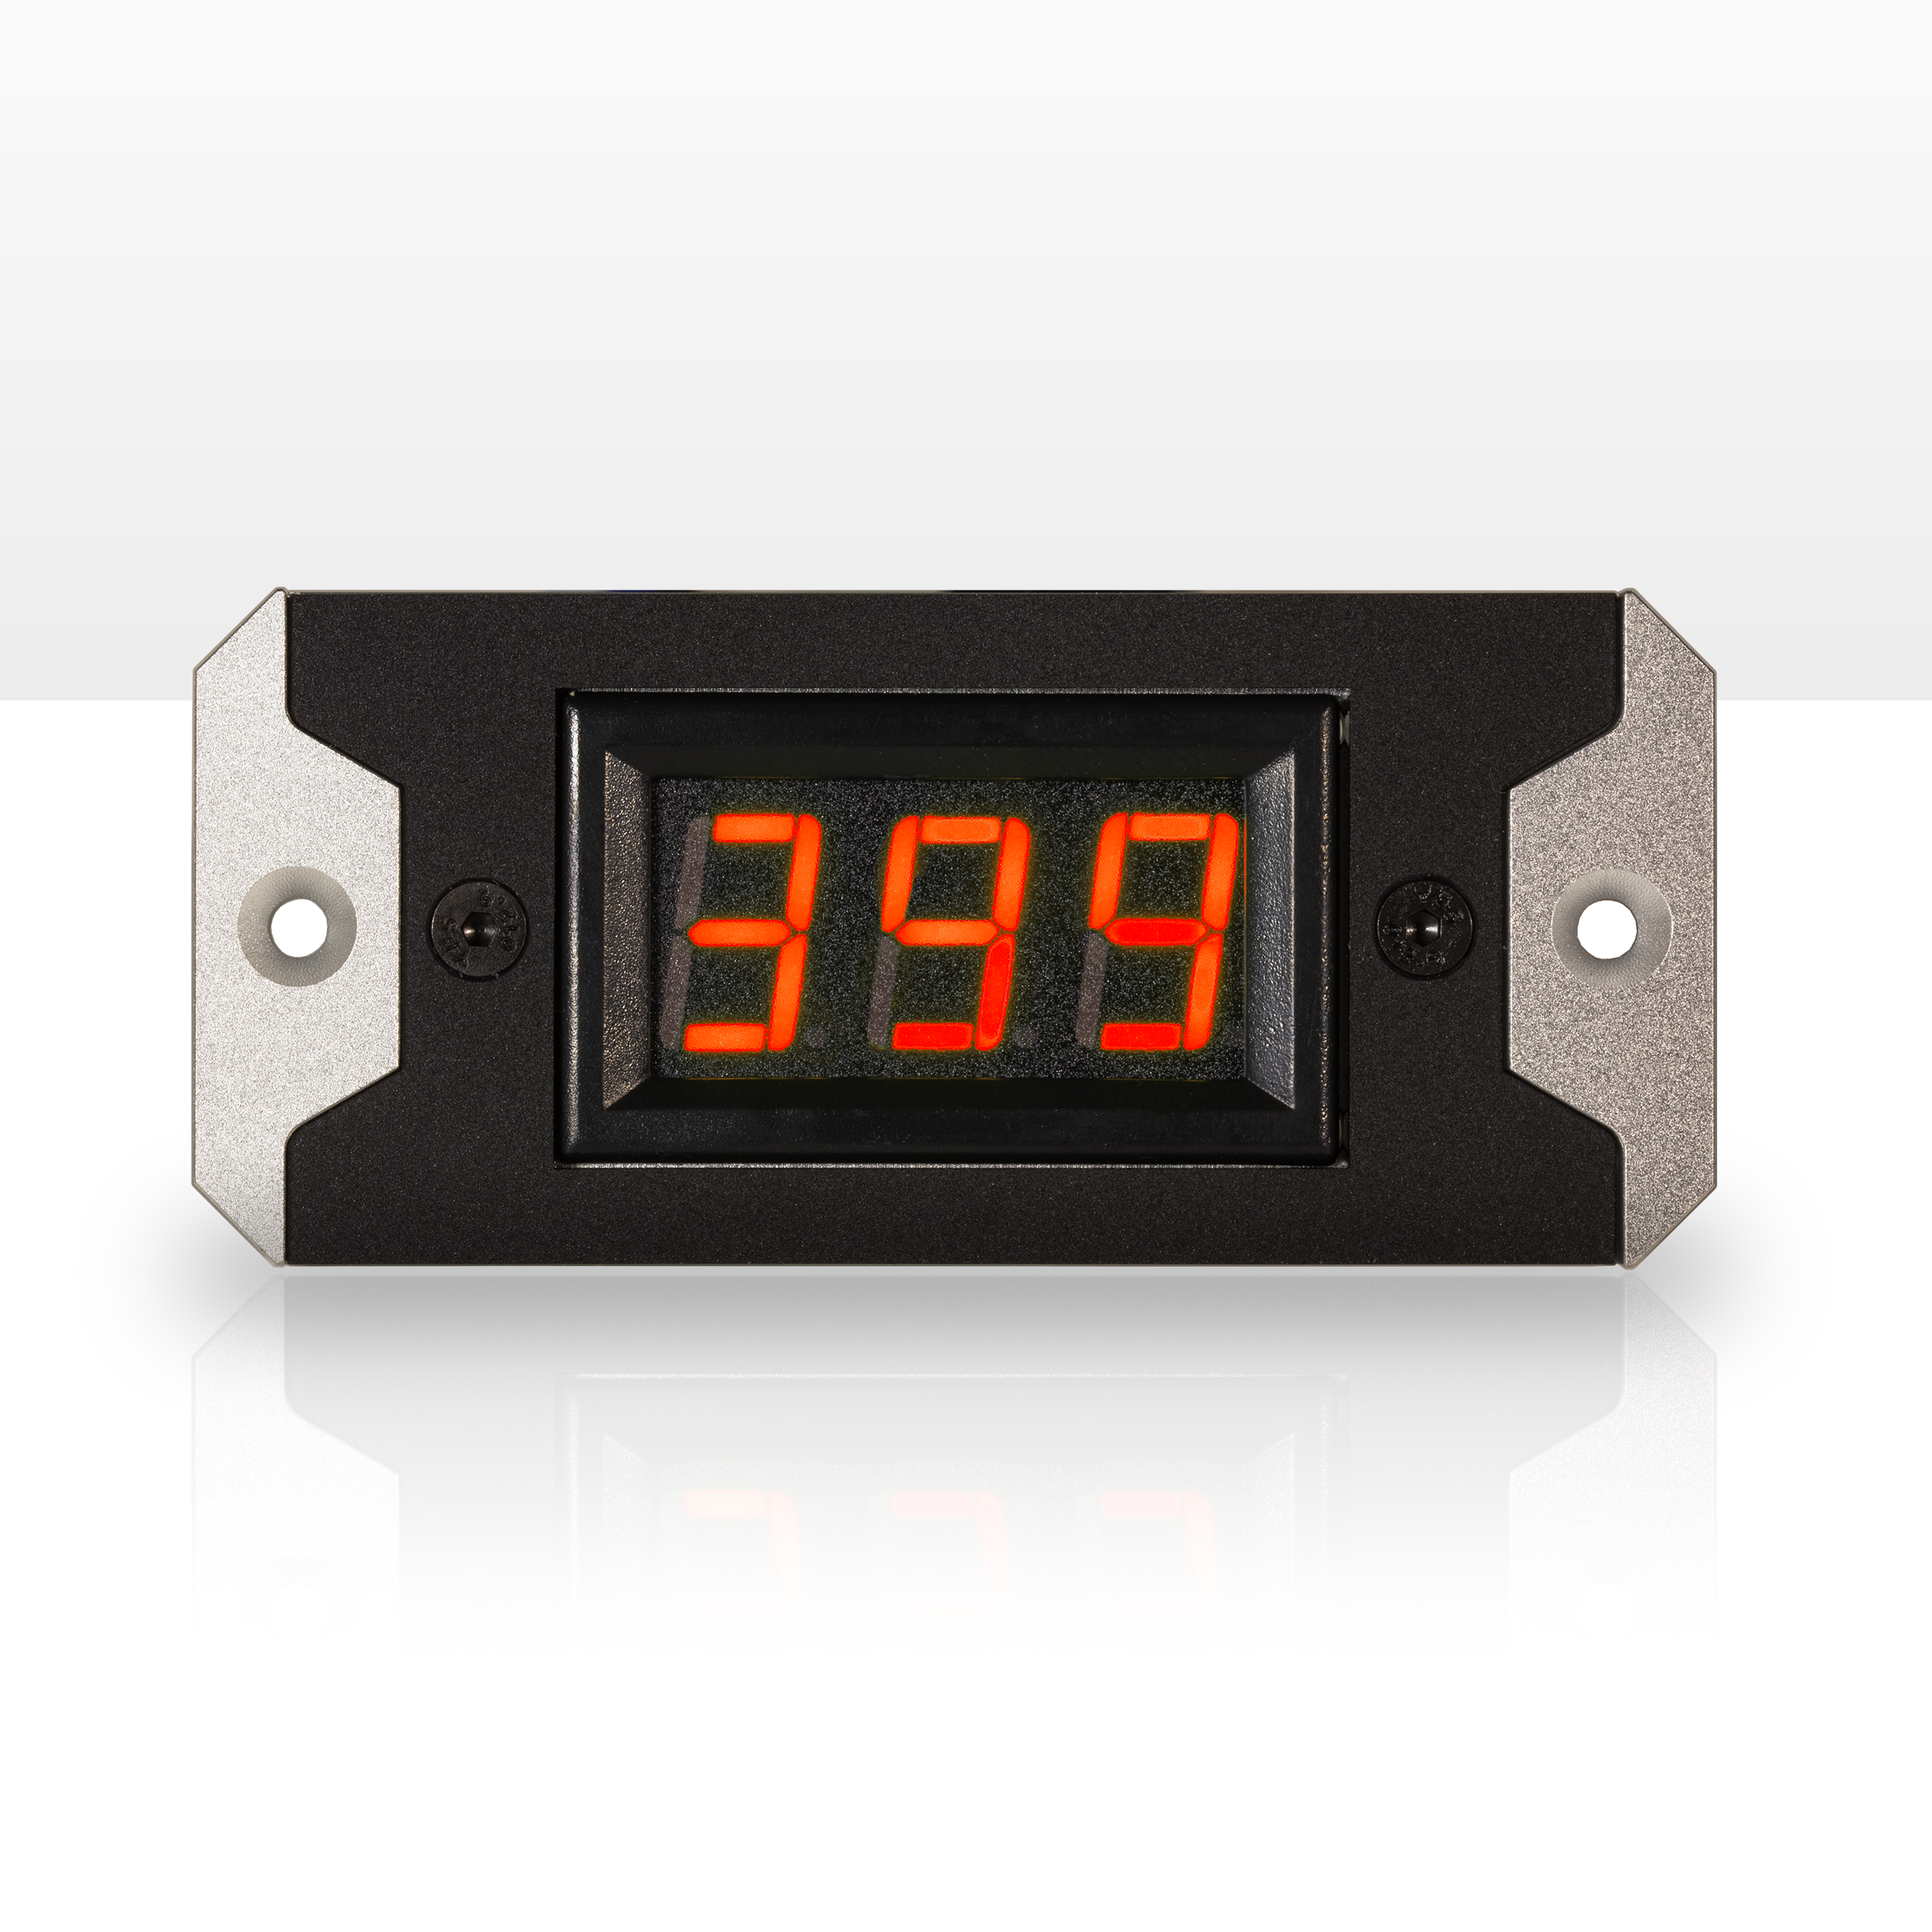 Billet Aluminum 10Hz LED Display for The Conductor